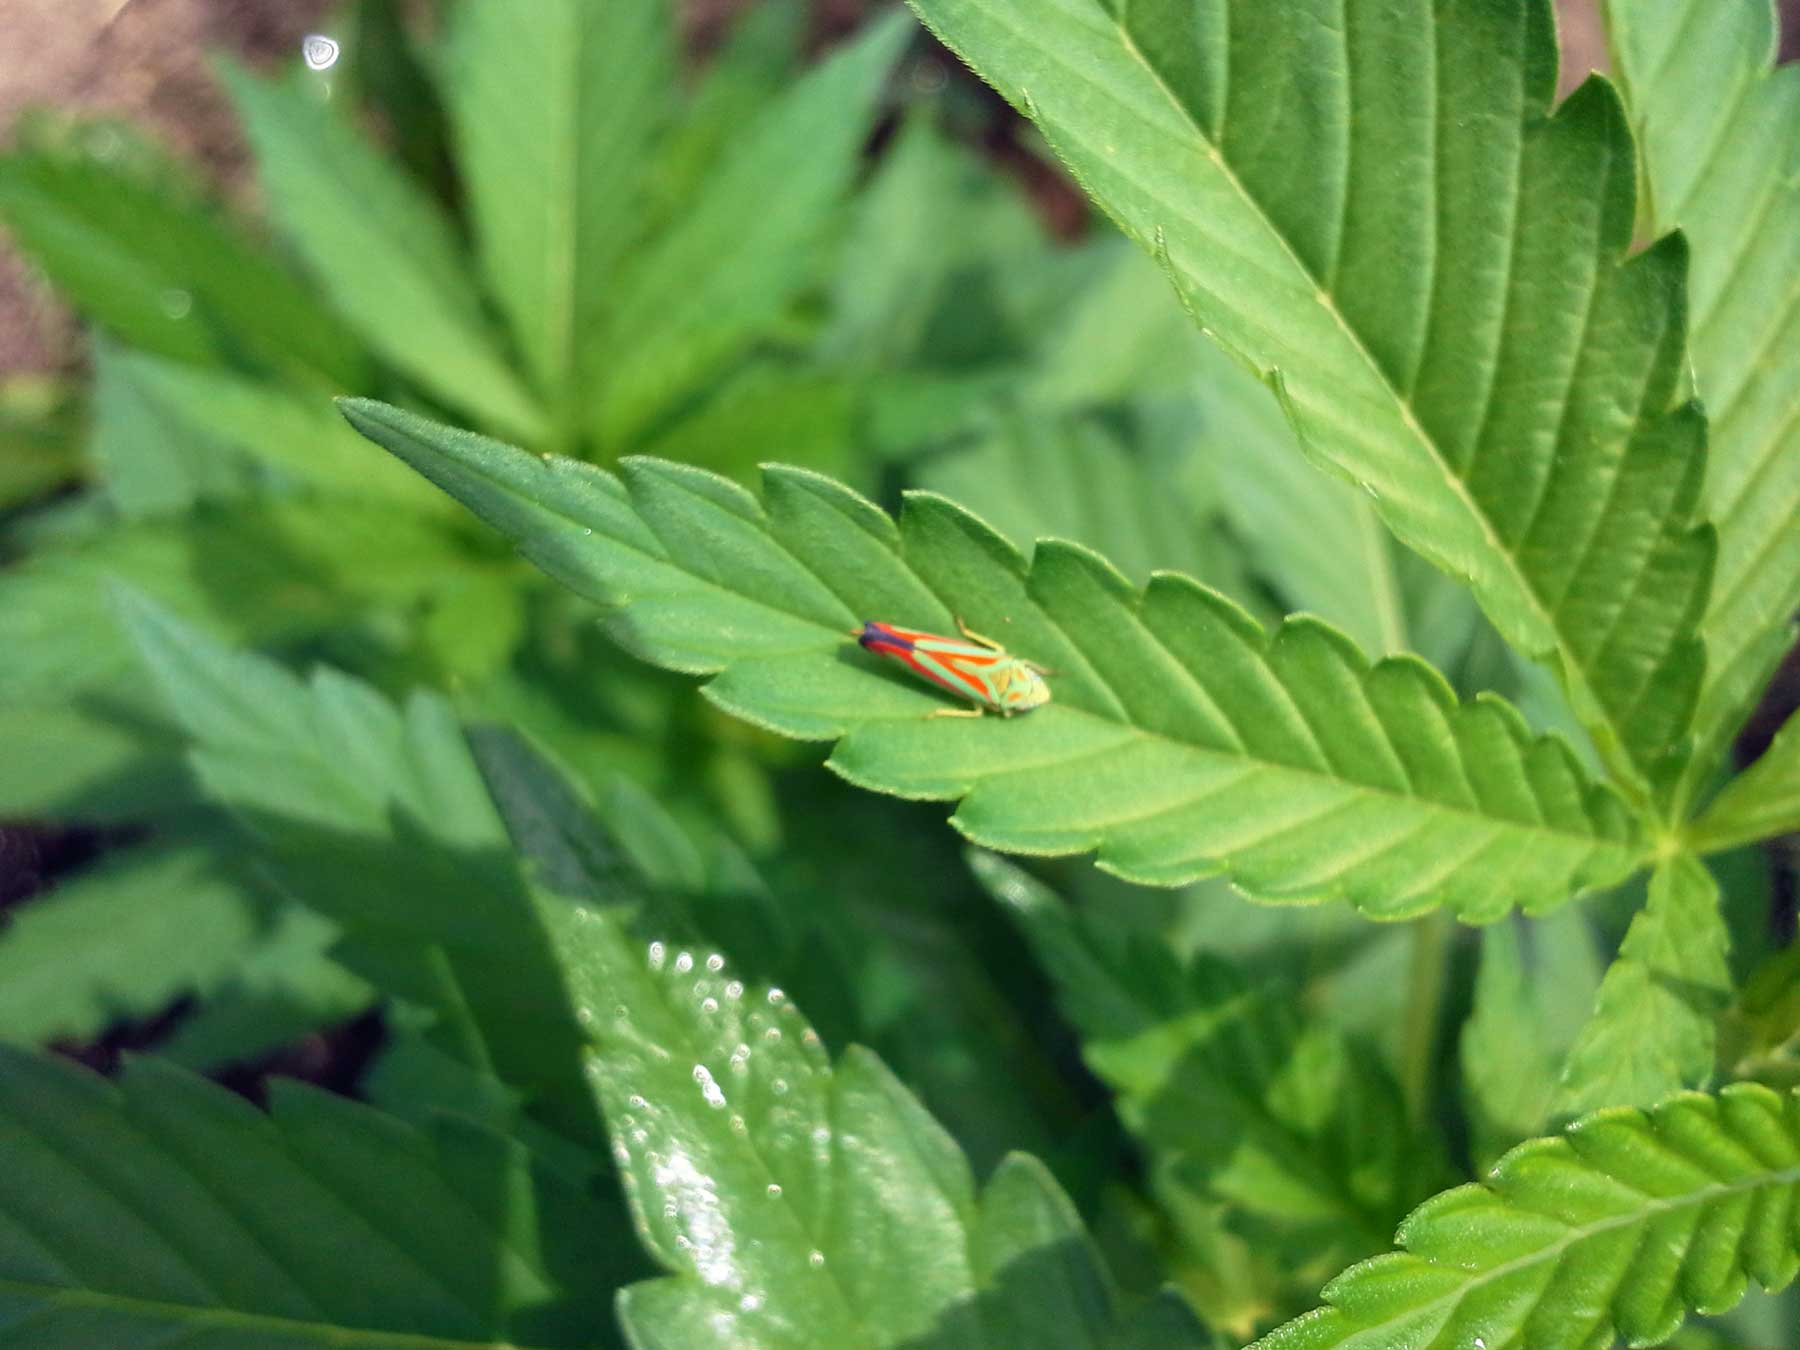 How to Get Rid of Leafhoppers | Grow Weed Easy